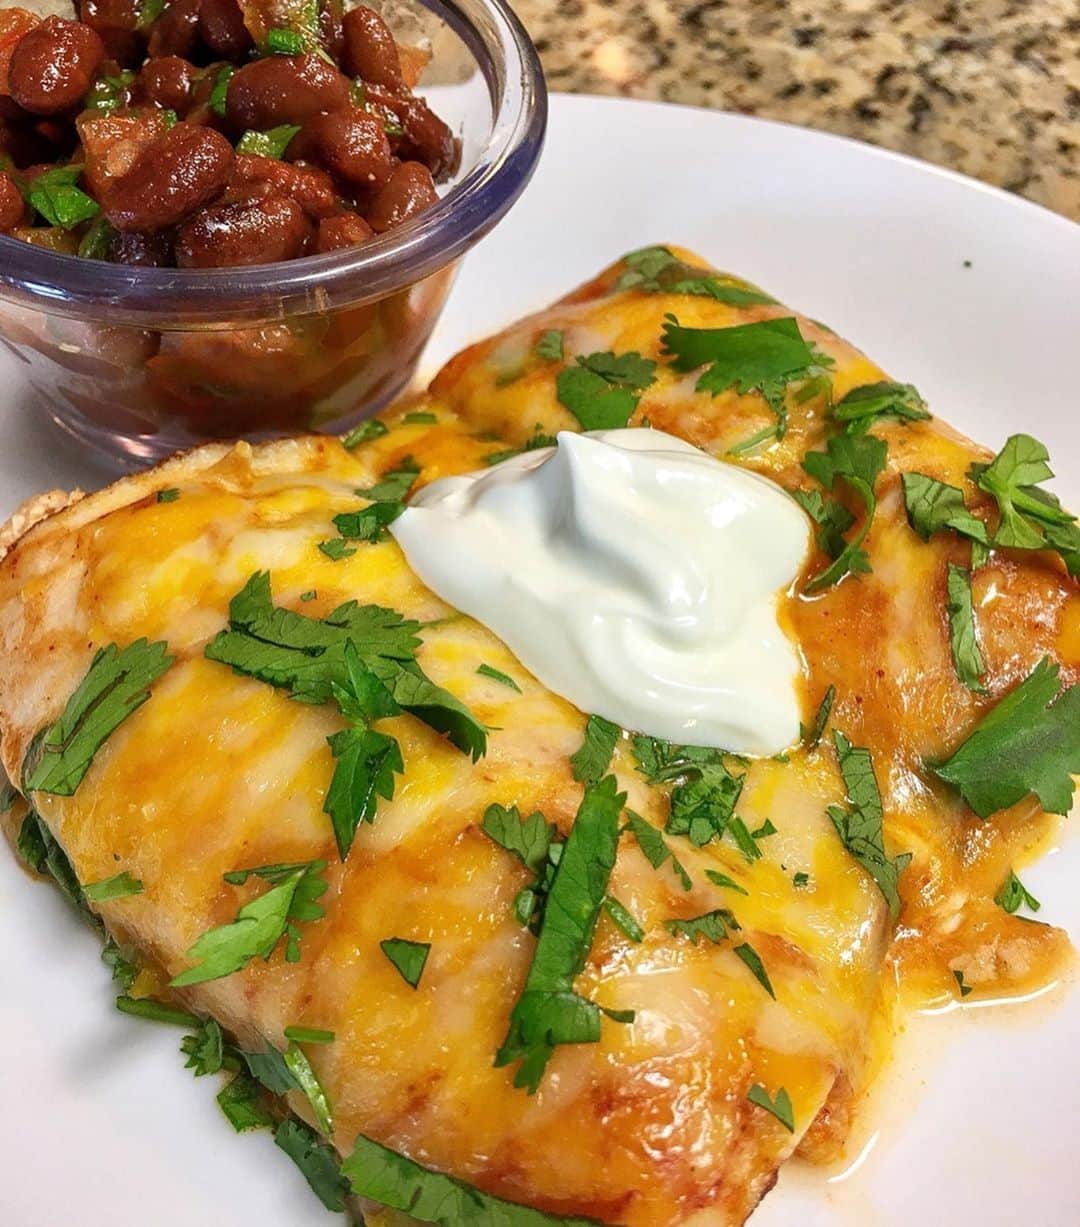 Flavorgod Seasoningsさんのインスタグラム写真 - (Flavorgod SeasoningsInstagram)「💥Back home and back to cooking. Tonight’s dinner is Sour cream Chicken Enchiladas (no tortilla/deli rollup style).﻿ -﻿ Made with:﻿ 👉 #flavorgod Taco Tuesday﻿ -﻿ On Sale here ⬇️﻿ Click the link in the bio -> @flavorgod﻿ www.flavorgod.com﻿ -﻿ -﻿ By: Customer @ketogalsara﻿ -﻿ 🔹Recipe🔹﻿ 💥1 1/2 cup shredded chicken﻿ 💥thick sliced deli chicken or turkey .﻿ 💥1/2 cup sour cream .﻿ 💥1/3 cup chunky picante sauce﻿ 💥1 tbs @flavorgod Taco Tuesday .﻿ 💥crumbled Colby/Monterey Jack cheese﻿ 💥Medium Red Enchilada sauce (check labels. They vary greatly by brand)﻿ —————————————————﻿ 🔥Mix chicken, sour cream, picante and taco seasoning in pan on stove until heated and well combined..﻿ 🔥Spoon chicken mixture onto deli meat and sprinkle a small amount of cheese inside.﻿ 🔥Pour a small amount of enchilada sauce in bottom of baking dish﻿ 🔥put rolled up enchiladas in pan seam side down. Top with additional enchilada sauce and cheese. .﻿ .🔥 Cook 375° for 15-20 minutes or until cheese is well melted. Top with sour cream and cilantro and enjoy. ———————————————-﻿ Beans are 1 net per half cup. I mixed in chunky salsa, lime juice and cilantro and chilled it before serving. Soooo good. .﻿ ———————————————— 🏷 tag a friend who needs to make these 🏷﻿ -﻿ #food #foodie #flavorgod #seasonings #glutenfree #mealprep  #keto #paleo #vegan #kosher #breakfast #lunch #dinner #yummy #delicious #foodporn ﻿」6月21日 9時00分 - flavorgod